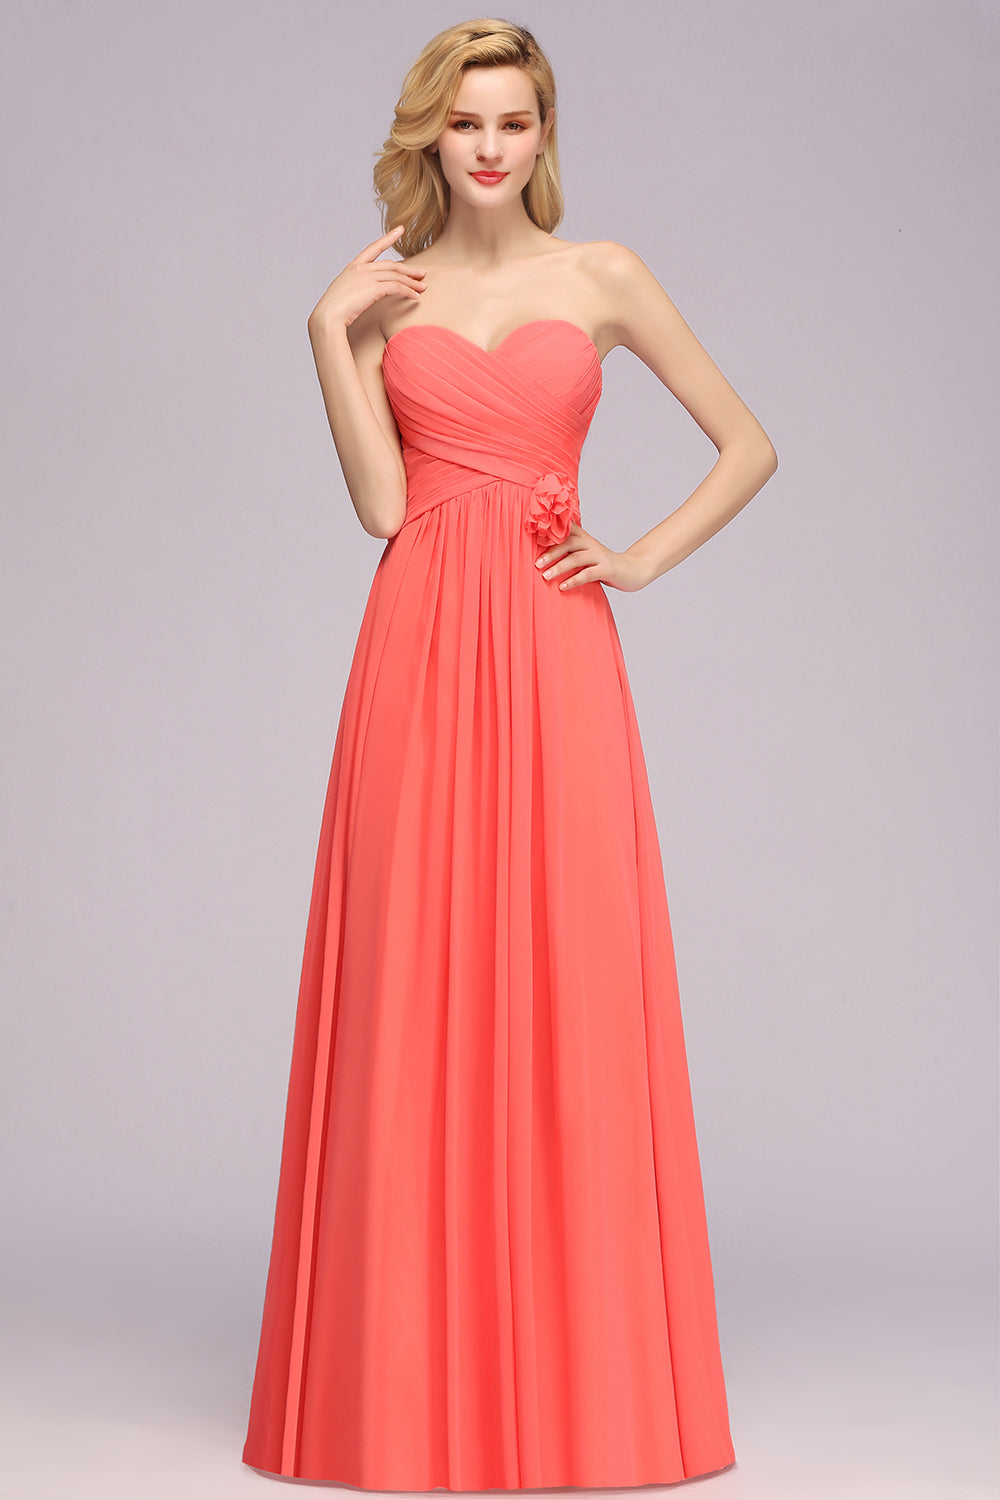 Simple Long Sweetheart Strapless A-line Bridesmaid Dress with Flower-BIZTUNNEL